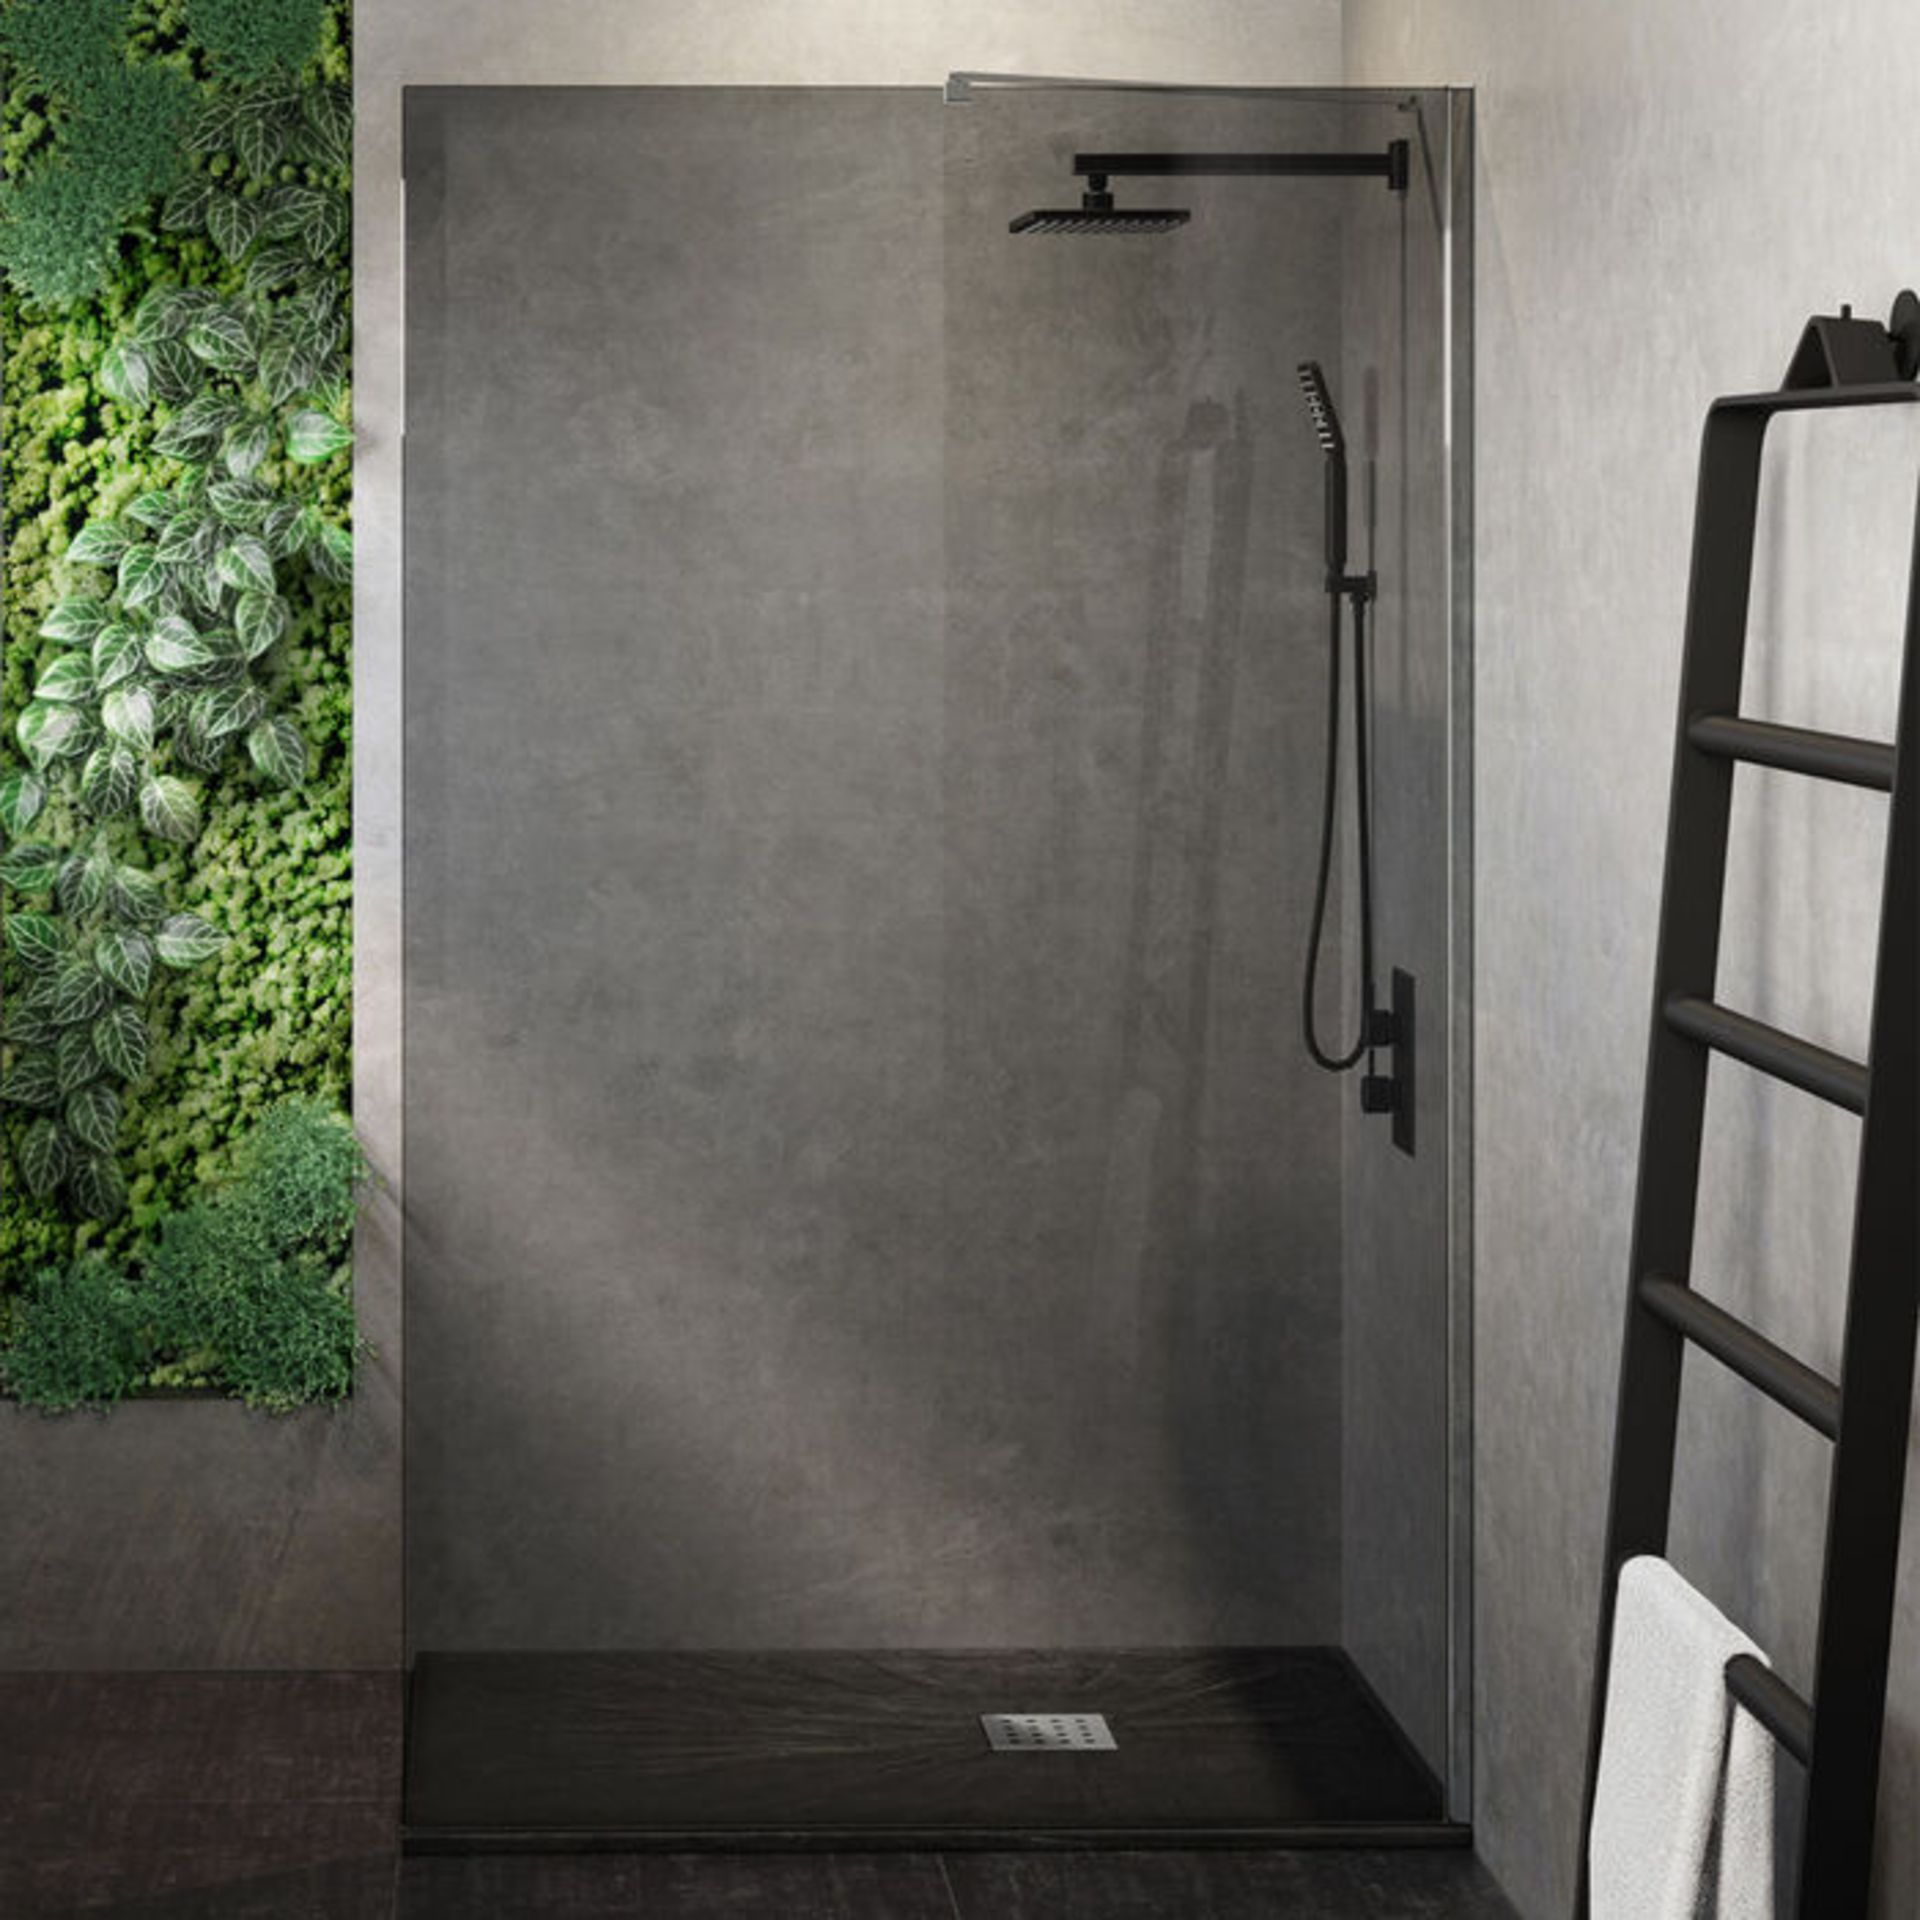 (RR6) 1200mm - 8mm Designer EasyClean Smoked Glass Wetroom Panel. RRP £499.99. Stylish smoked ... ( - Image 4 of 5